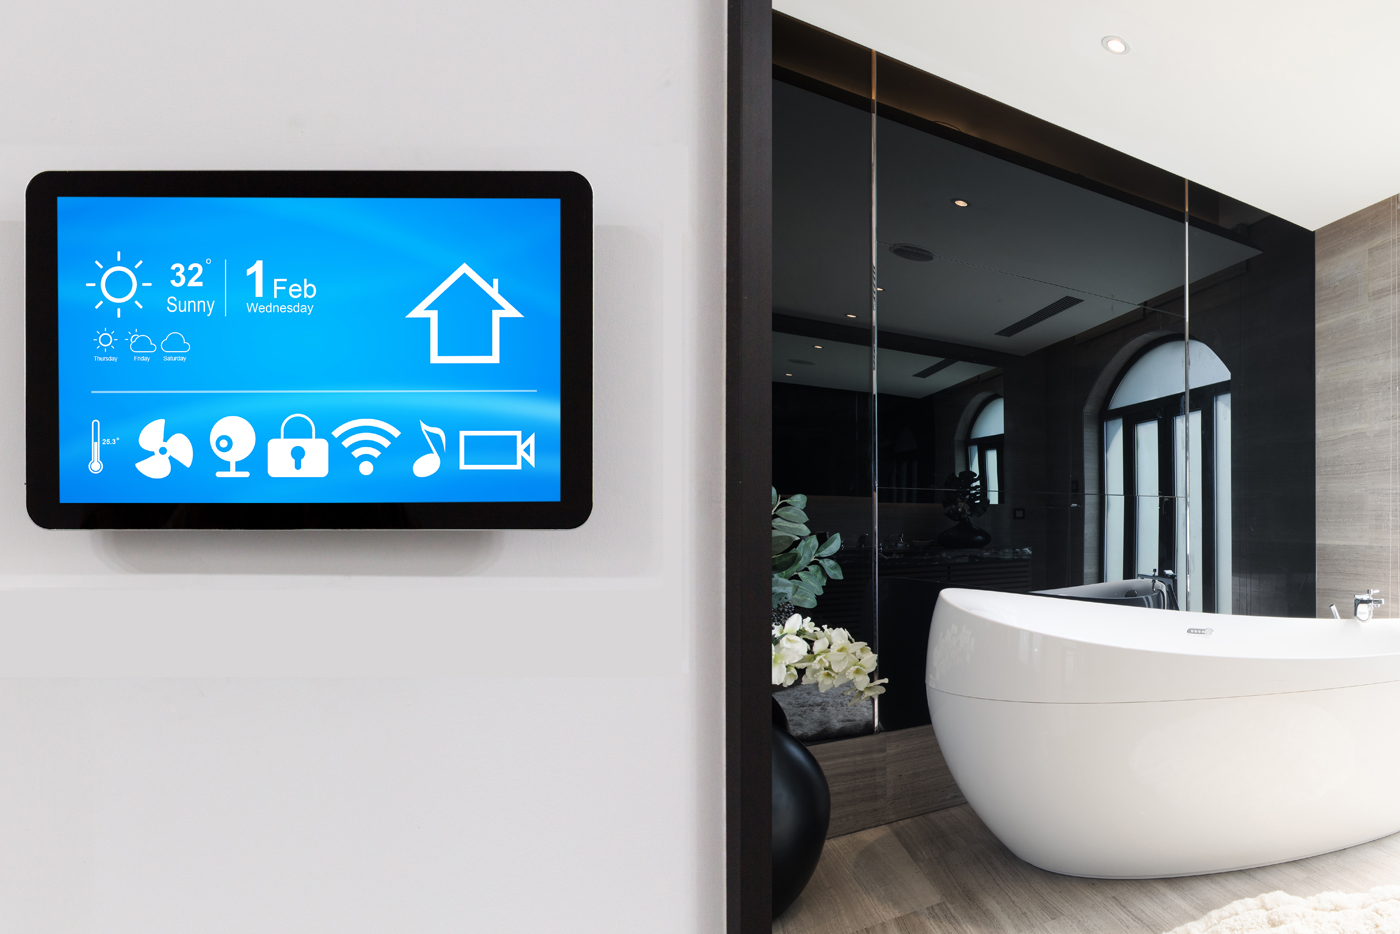 The Bathroom Of The Future: What Will It Look Like? | Bernard Marr